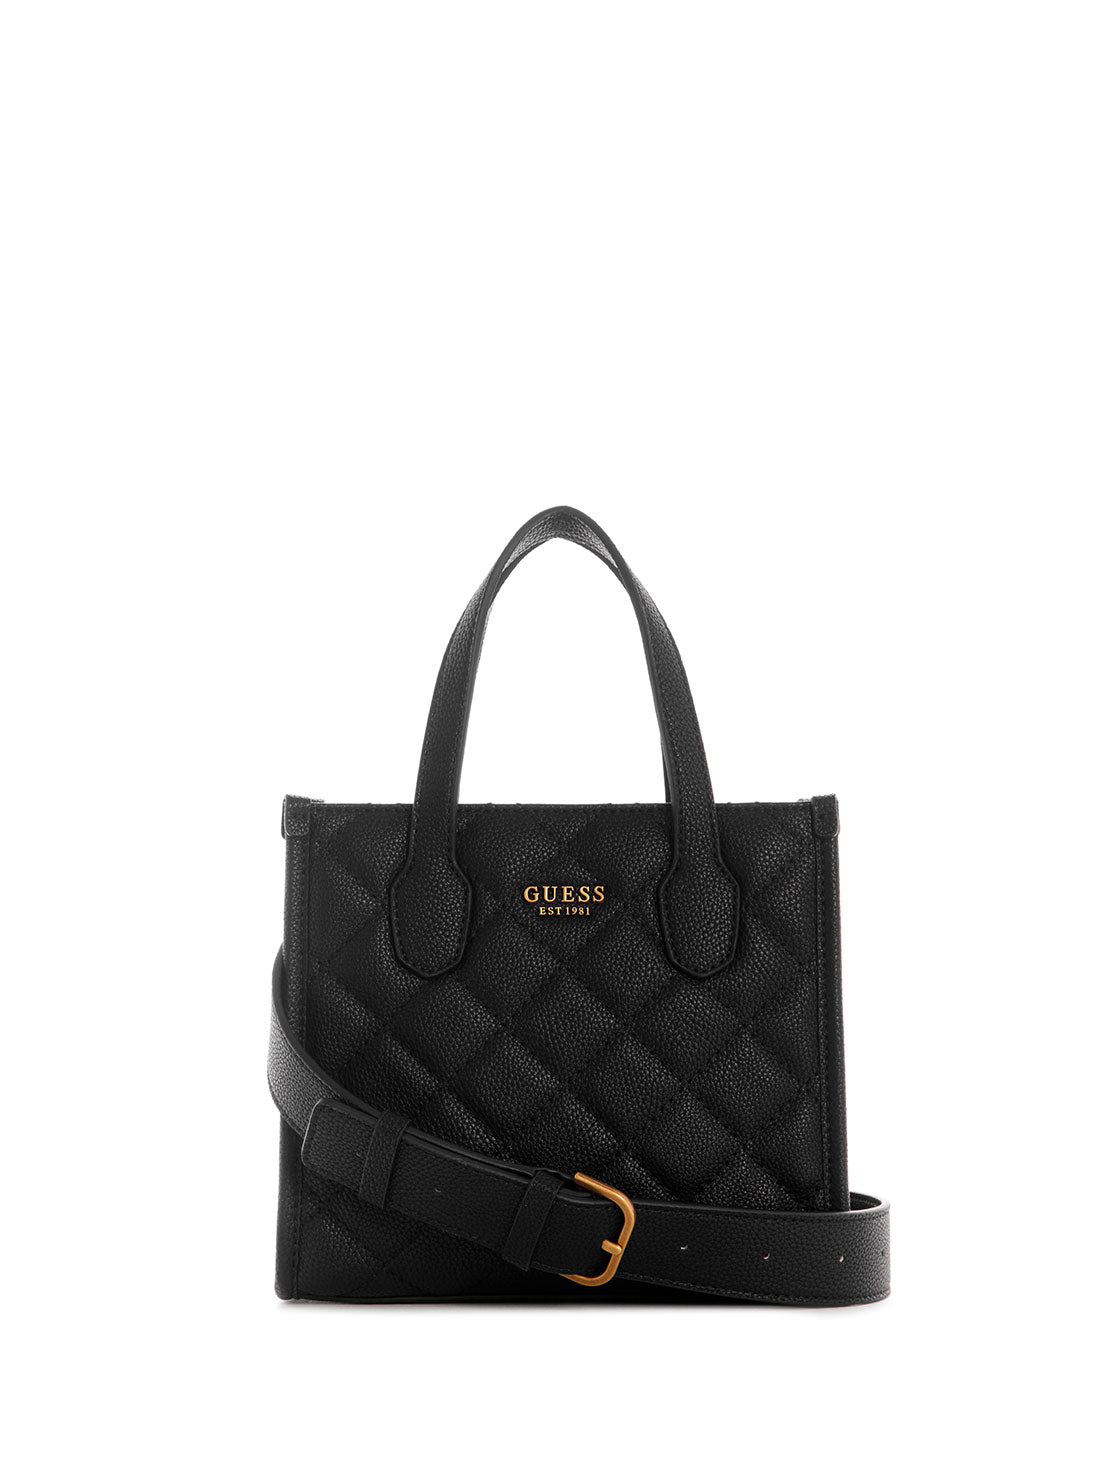 GUESS Womens Black Quilted Silvana Mini Tote Bag front view